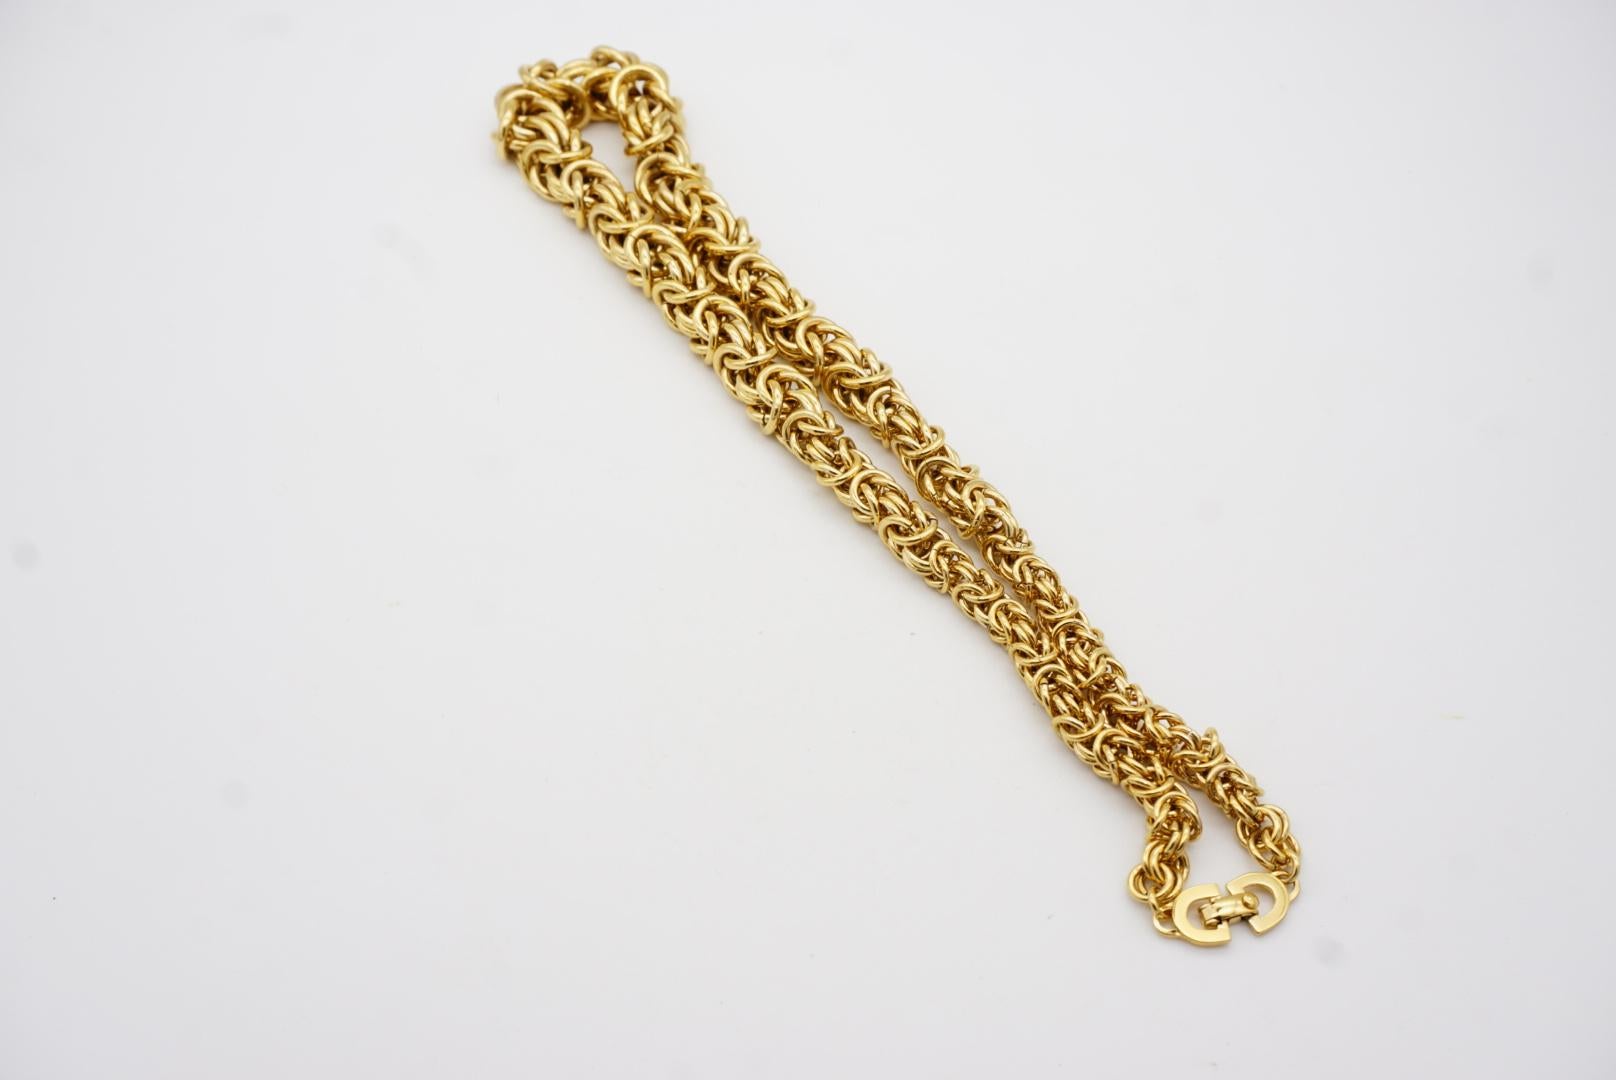 Christian Dior Vintage 1980s Byzantine Braid Royal Mesh Knot Link Rope Necklace For Sale 9